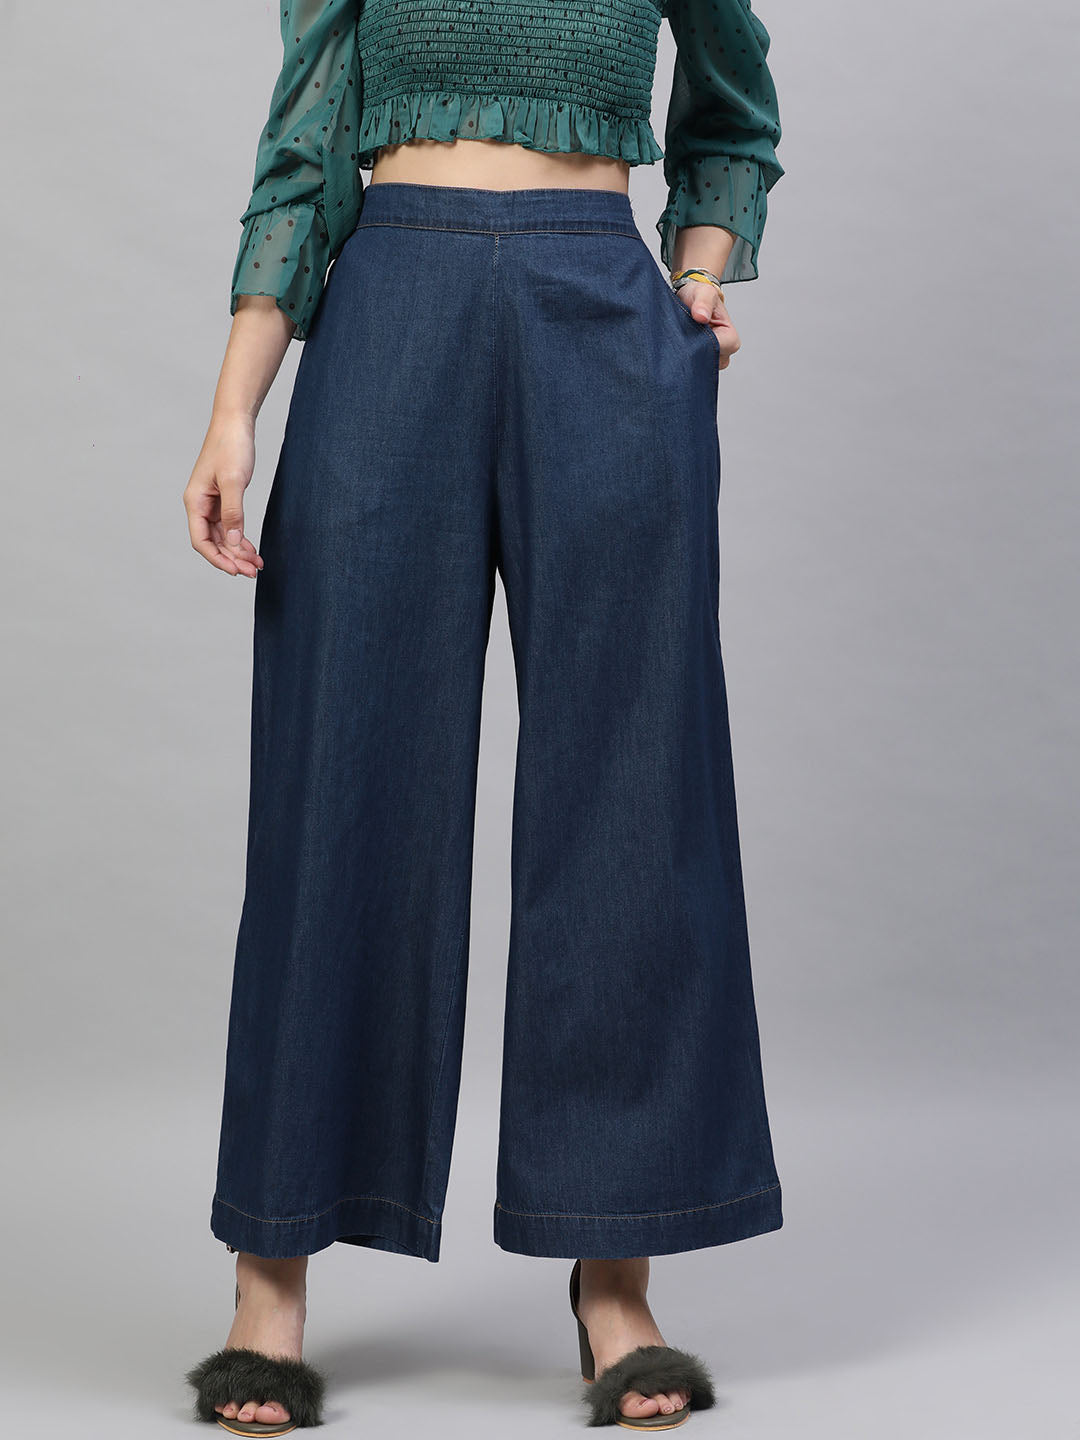 Kassually Trousers and Pants  Buy KASSUALLY Green Front Pocket Chain  Embellished Straight Parallel Trouser Online  Nykaa Fashion